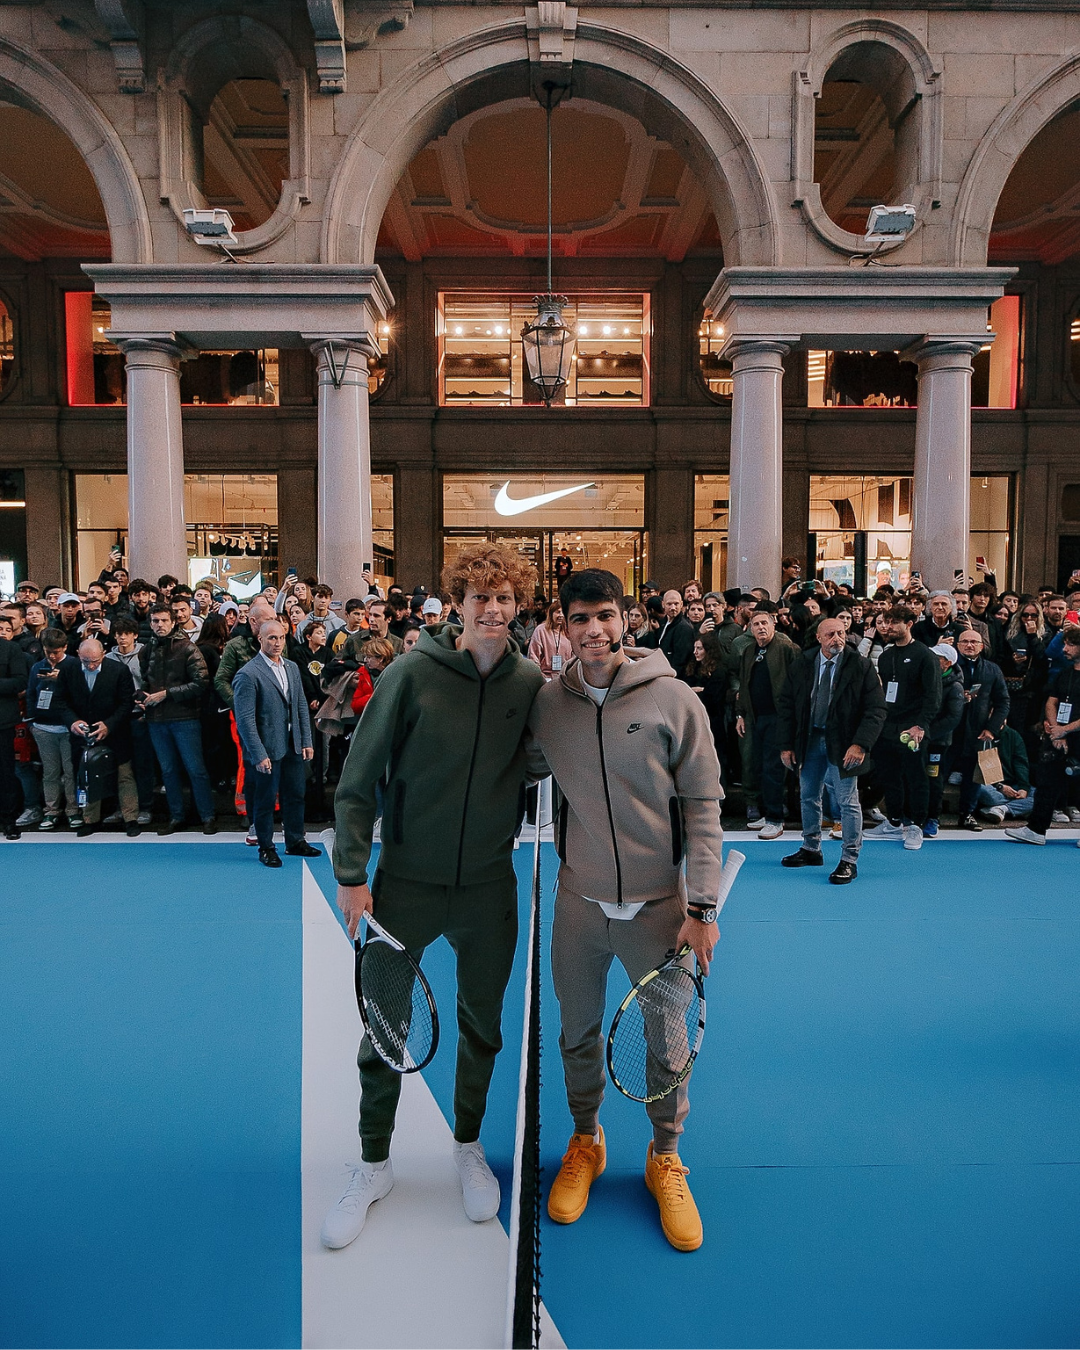 Sinner and Alcaraz kick off Turin ATP Finals We were at the Nike event featuring the two strongest tennis players of the new generation